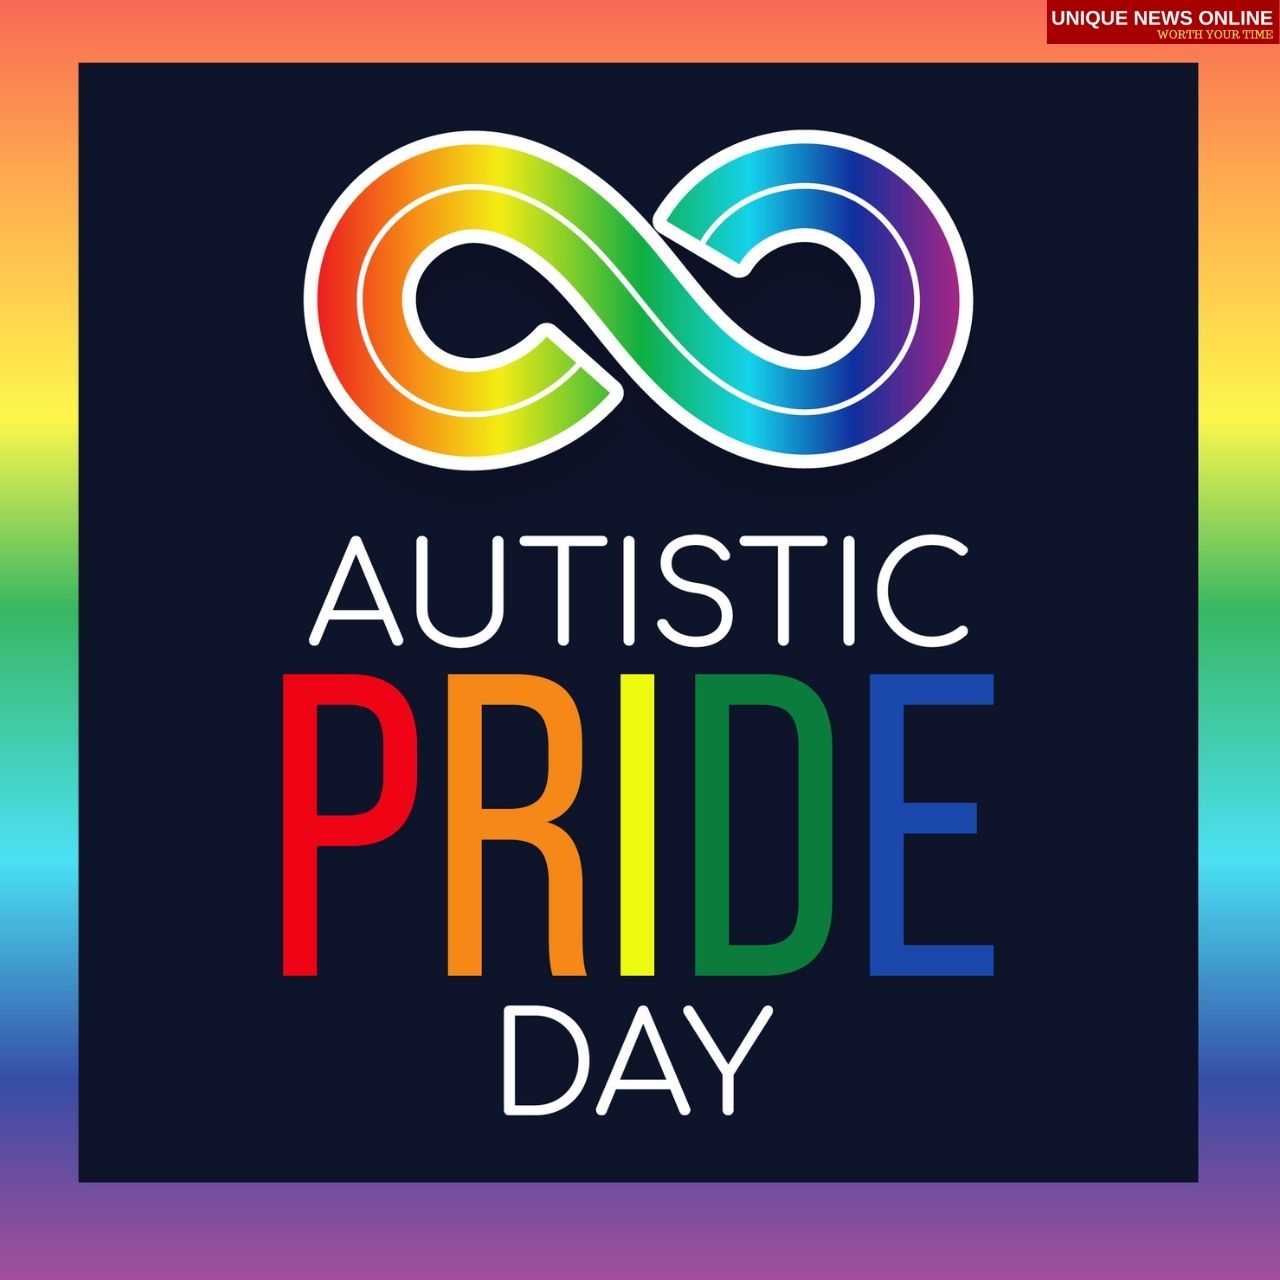 Autistic Pride Day 2021 Theme, Quotes, and Messages to Share